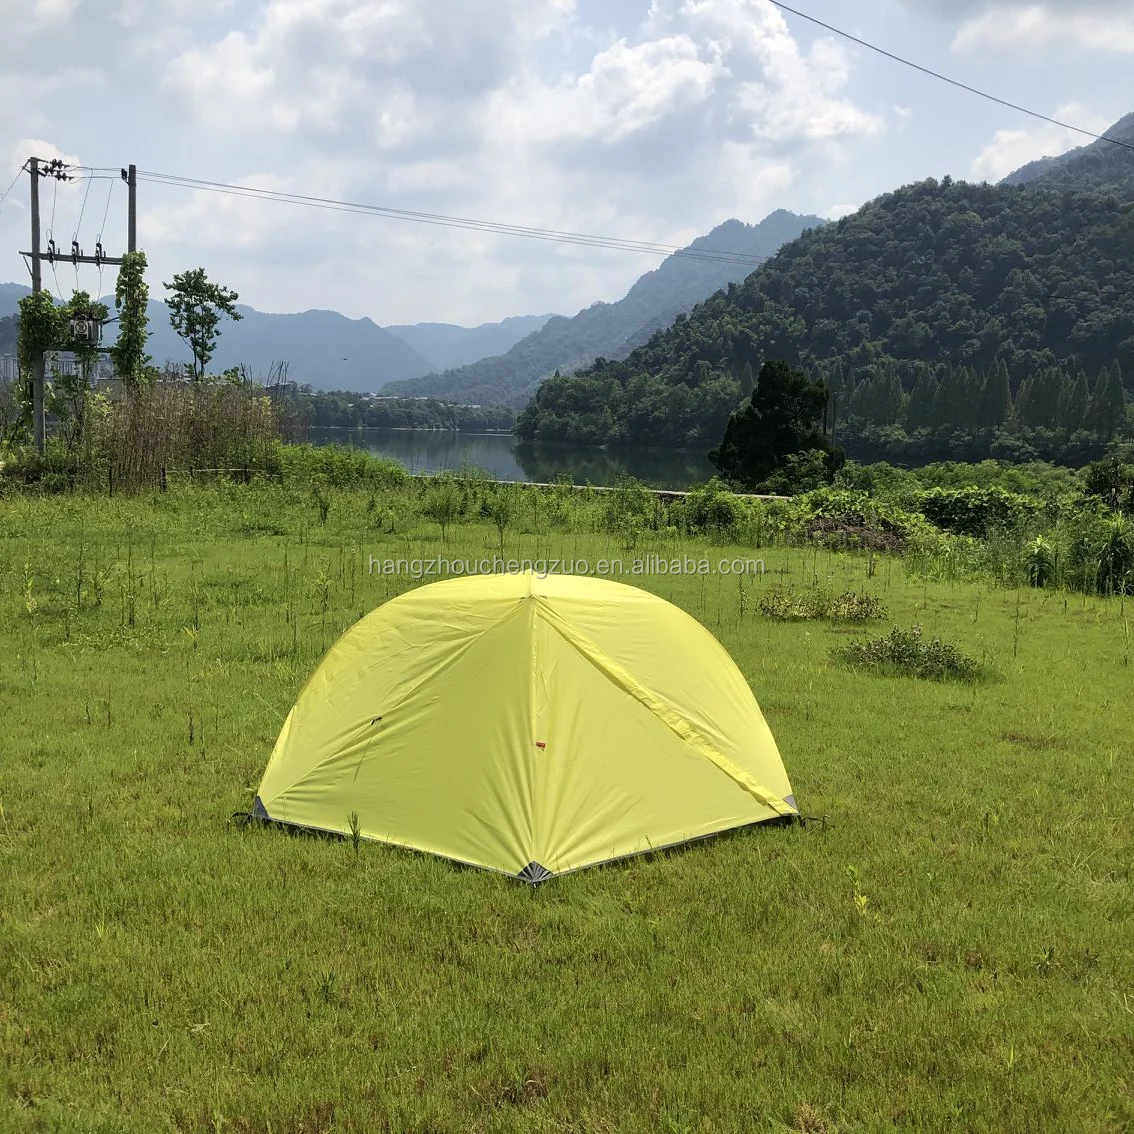 Yellow Color Msr Hubba Hubba Nx 1 Person Lightweight Backpacking Tent Czx 341 Yellow Camping Tent Come With Matched Footprint Buy Yellow Tent Msr Hubba Hubba Nx Tent Msr Tent Product On Alibaba Com